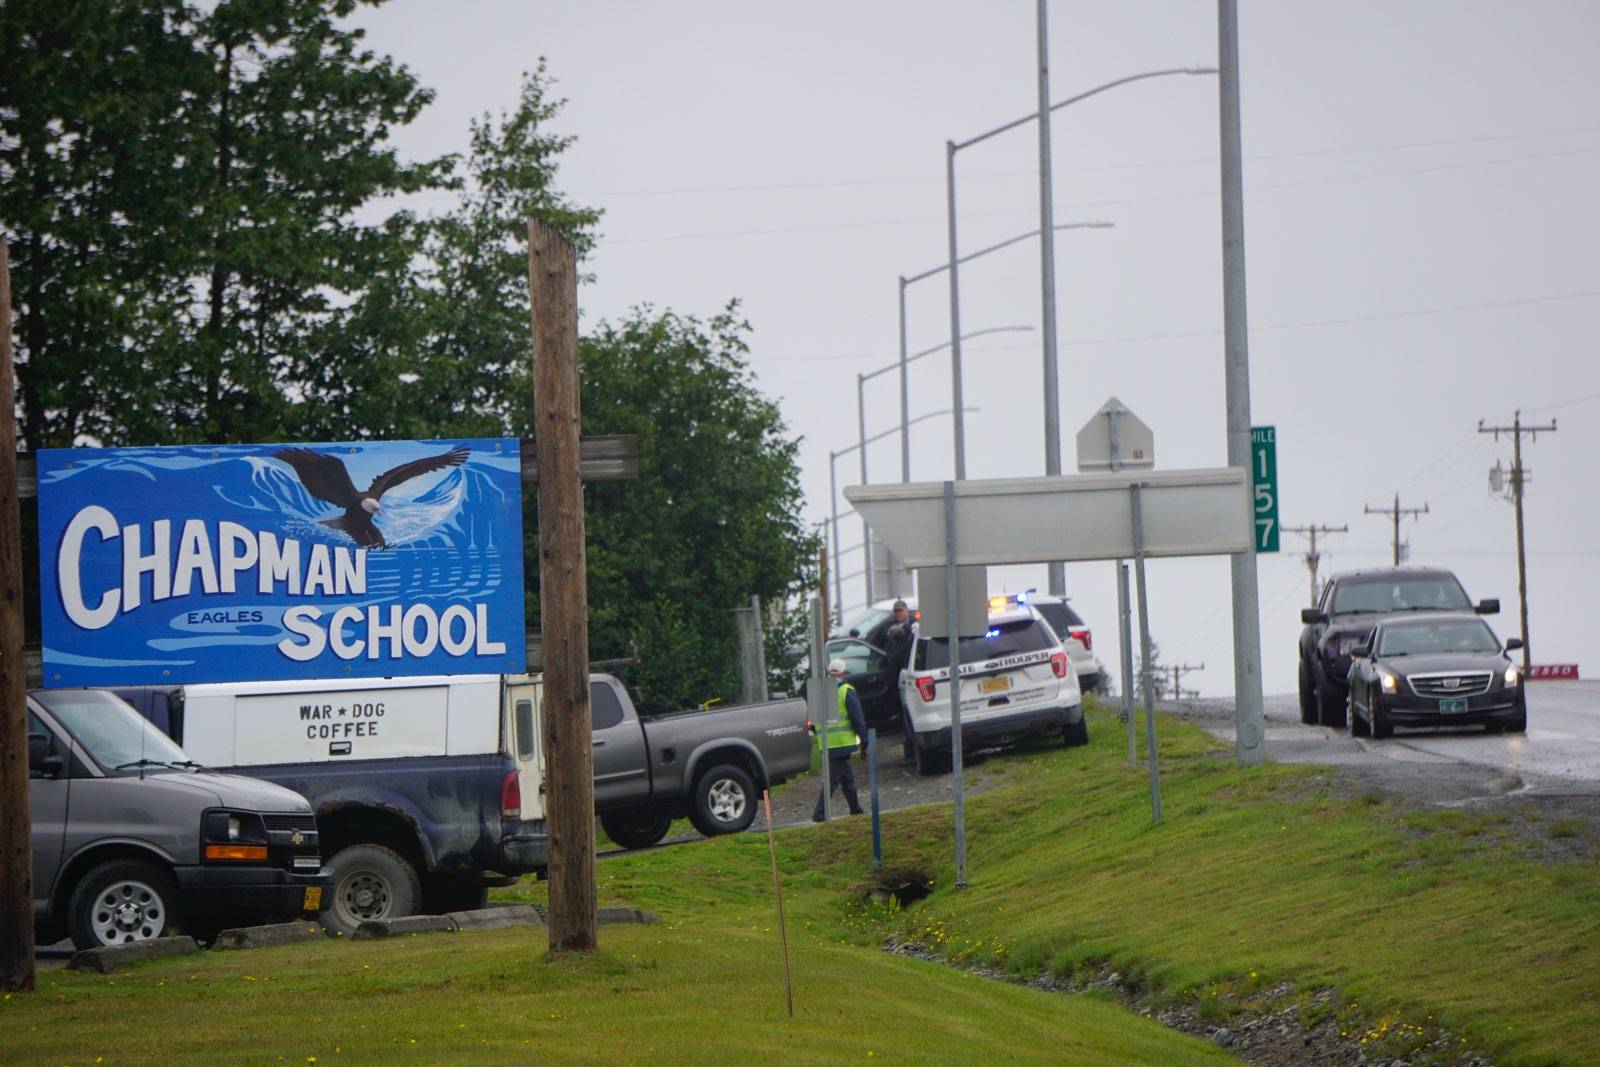 Parents pick up students on Tuesday, Aug. 23, 2021, at Chapman School in Anchor Point, Alaska. (Photo by Michael Armstrong/ Homer News)